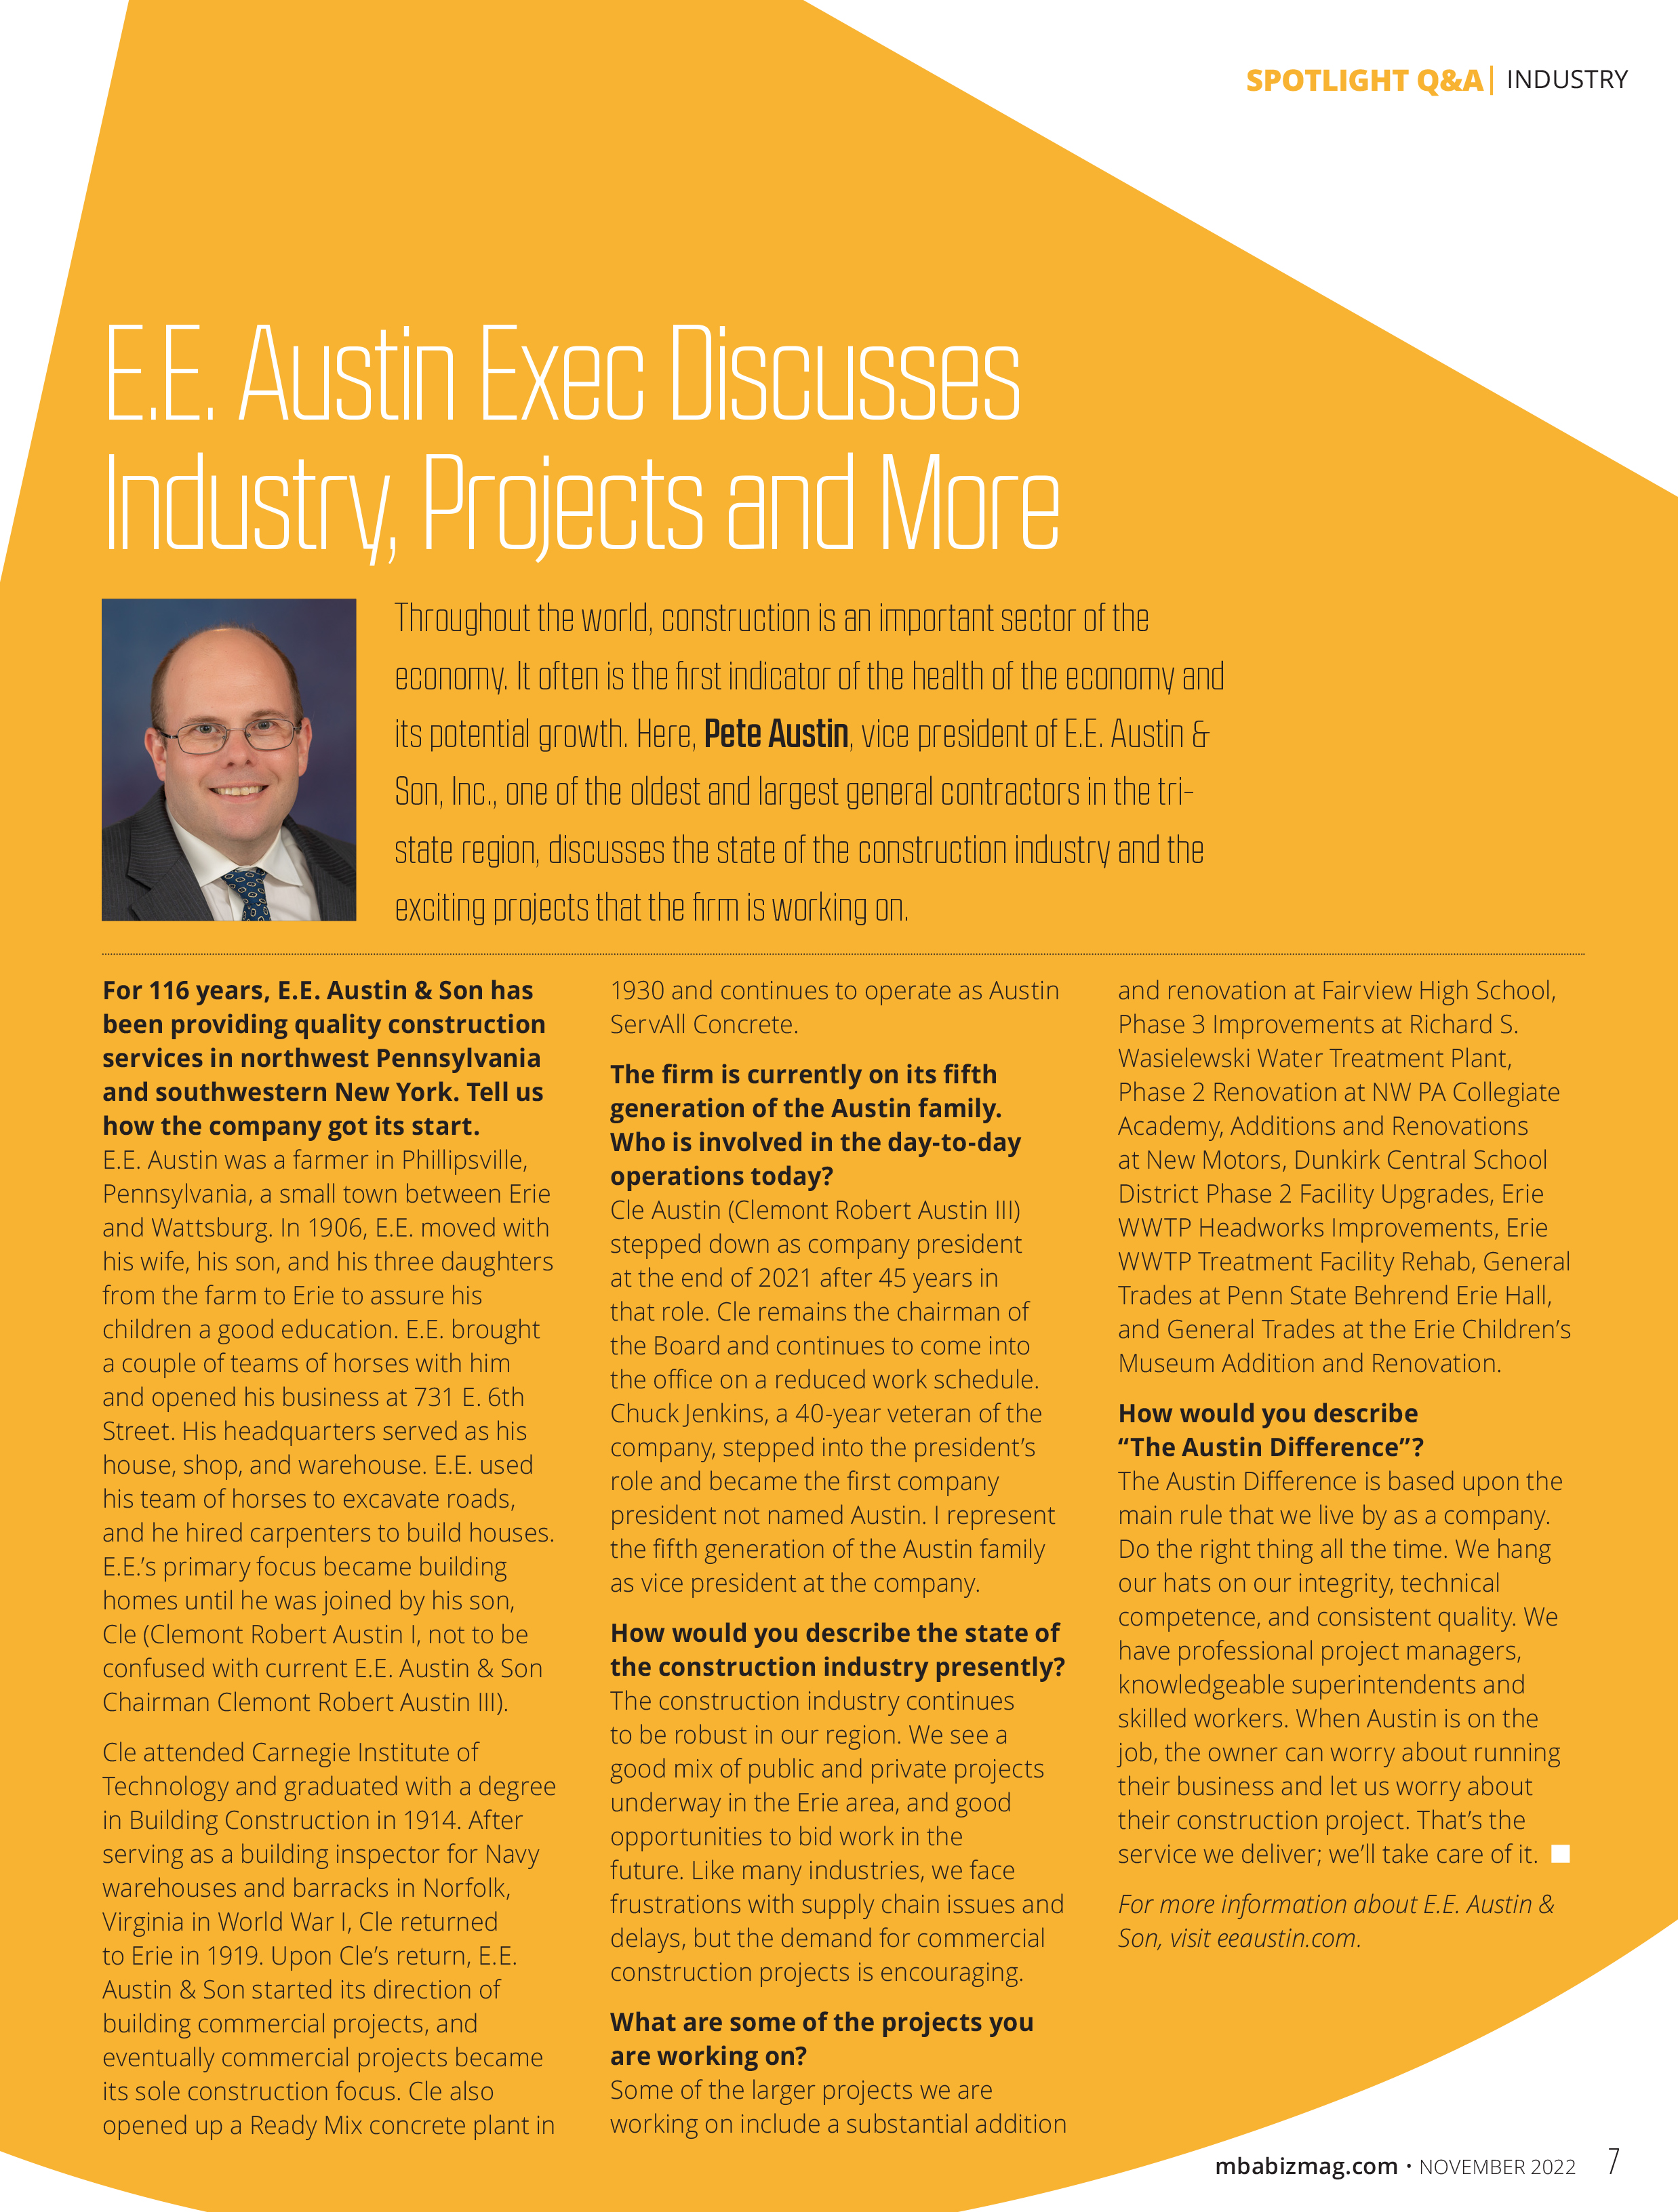 E.E. Austin Exec Discusses Industry, Projects and More